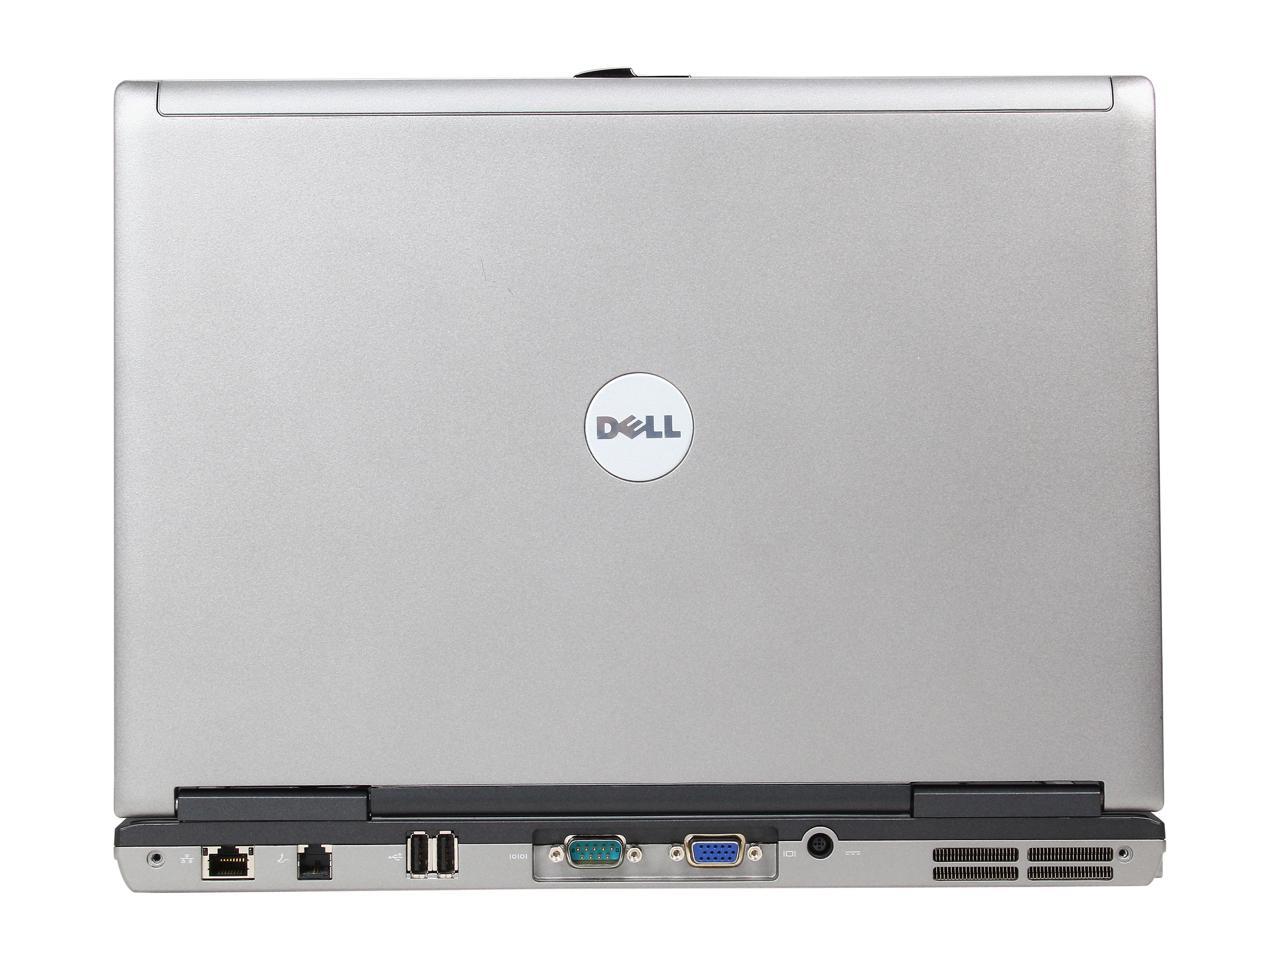 Refurbished: DELL Laptop Latitude D630 Intel Core 2 Duo 2.00 GHz 2 GB